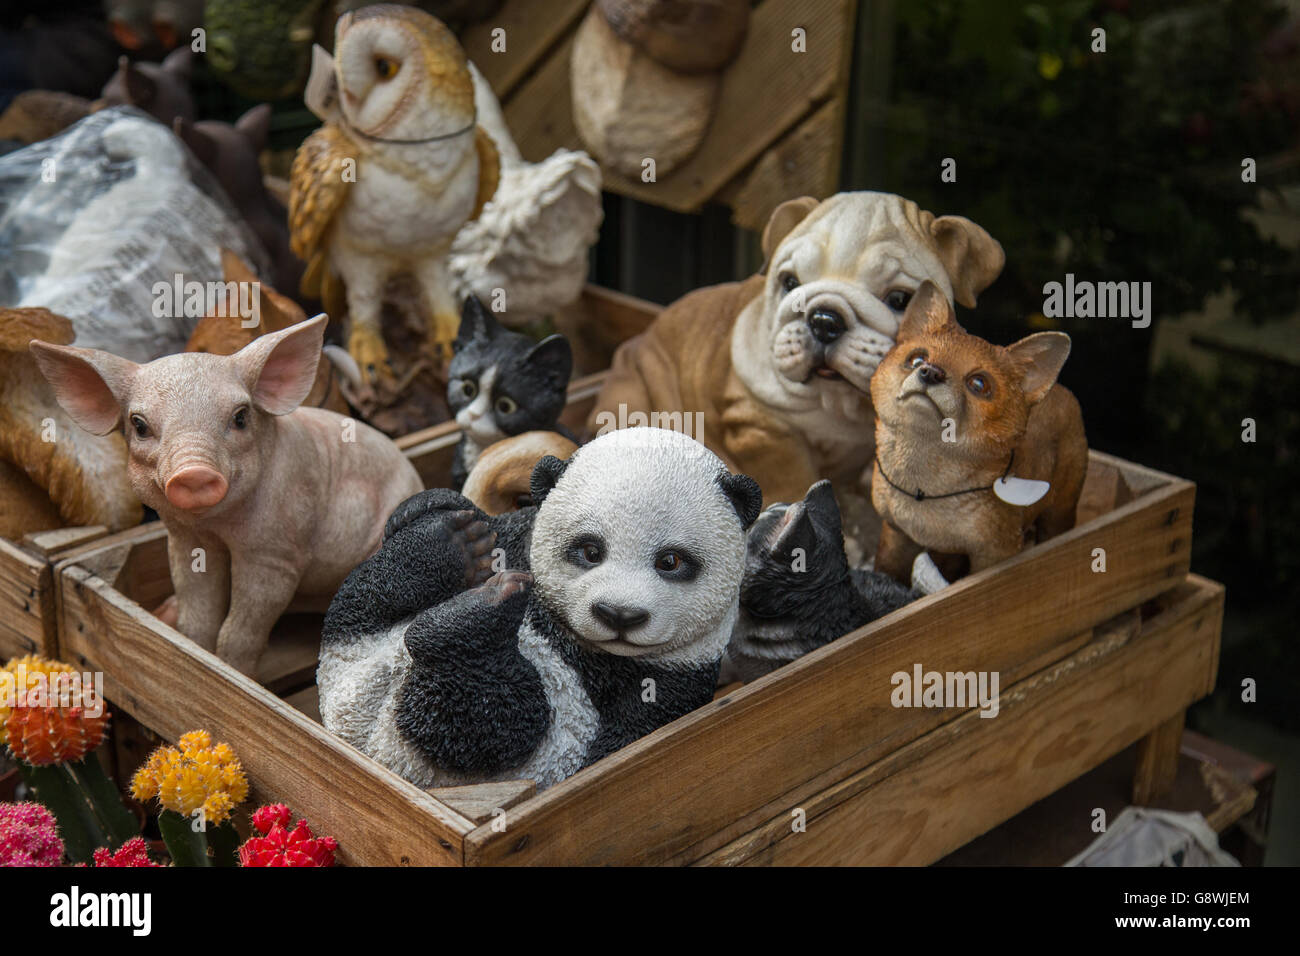 A box of plastic animals on sale at a market in Amsterdam Stock Photo